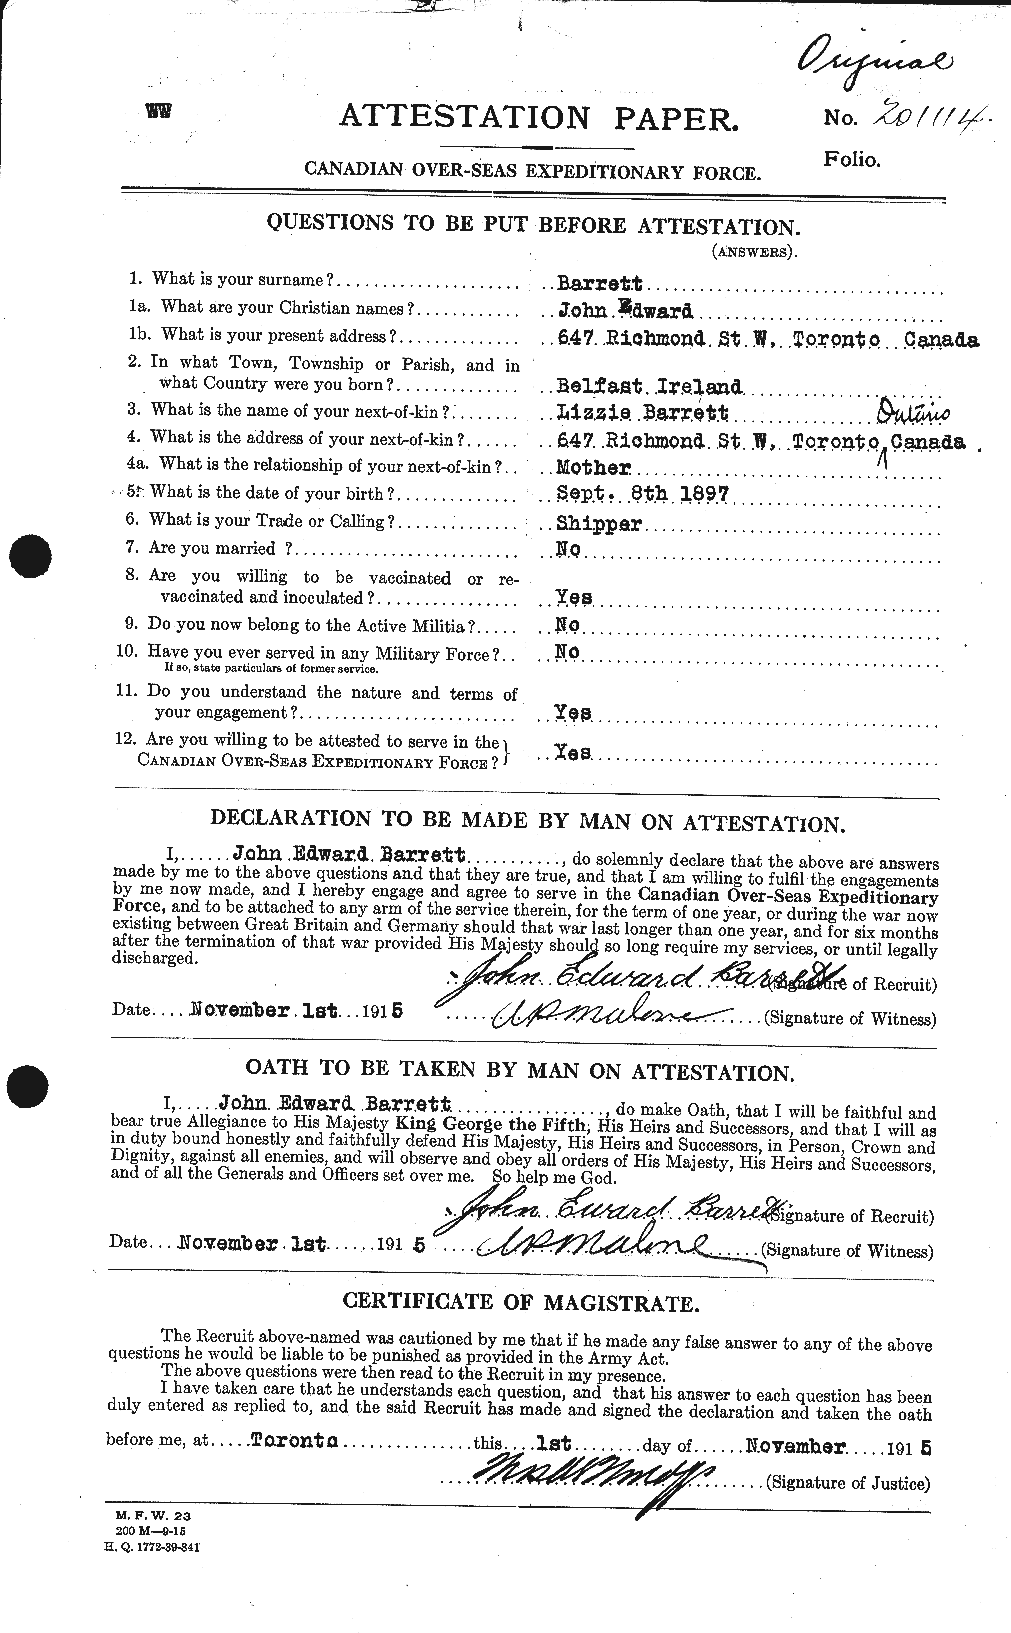 Personnel Records of the First World War - CEF 220246a